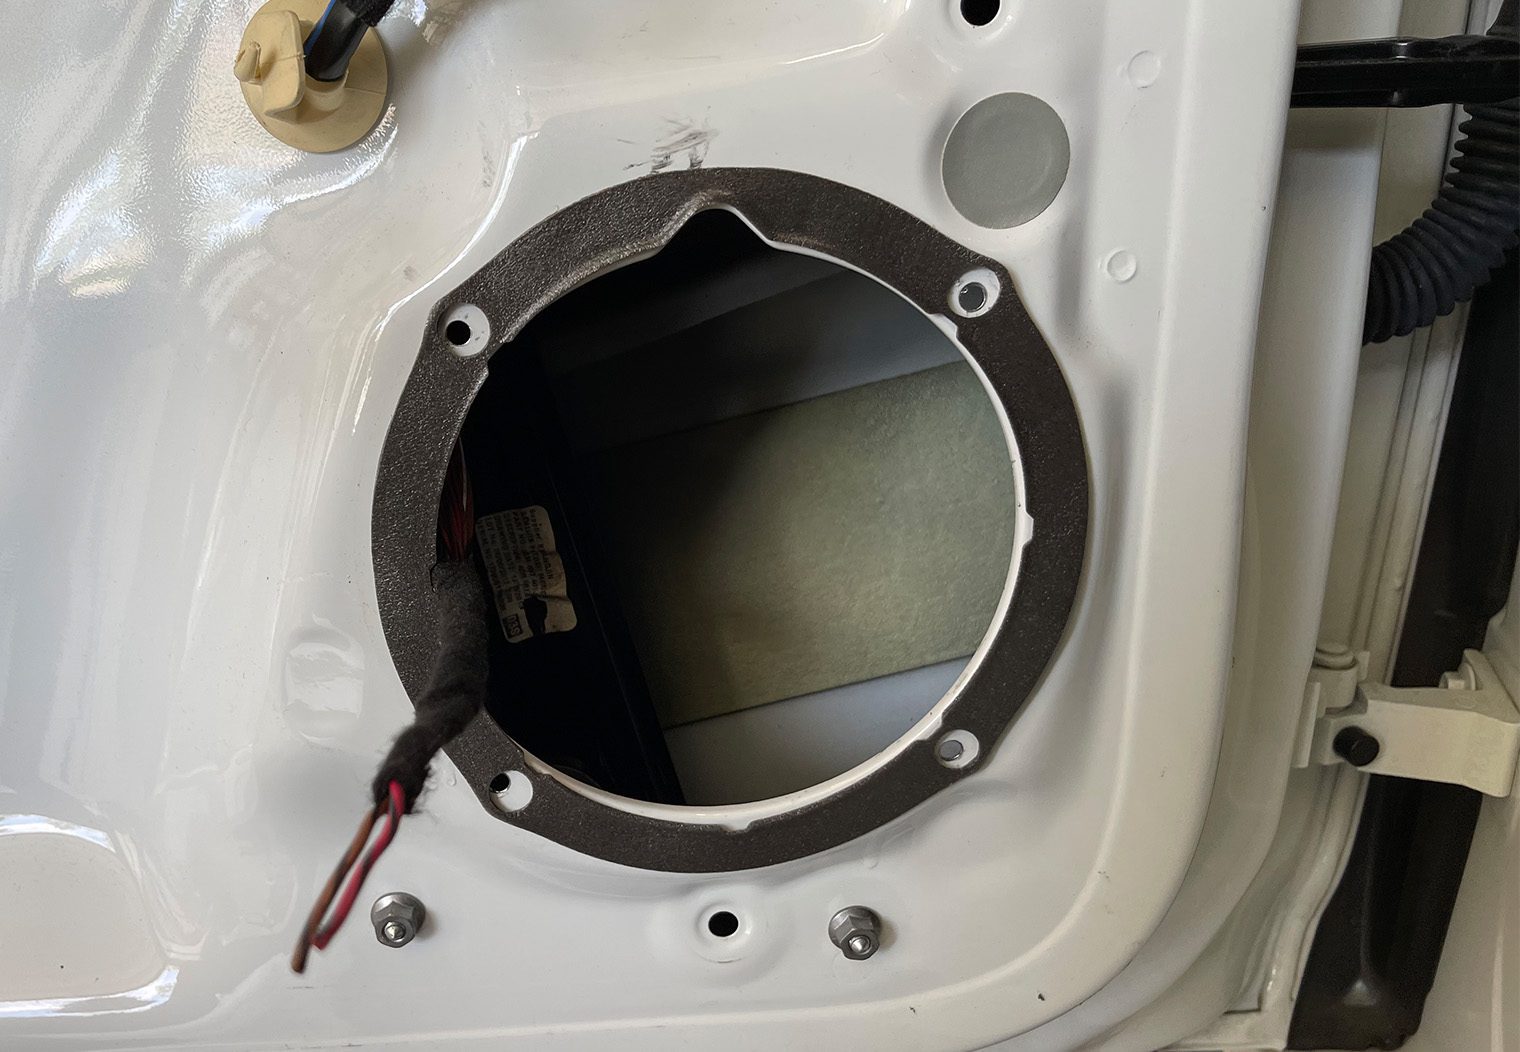 Picture of the driver front door of VW GTI MK7.5 with sealing material before installing upgraded Sony component speakers